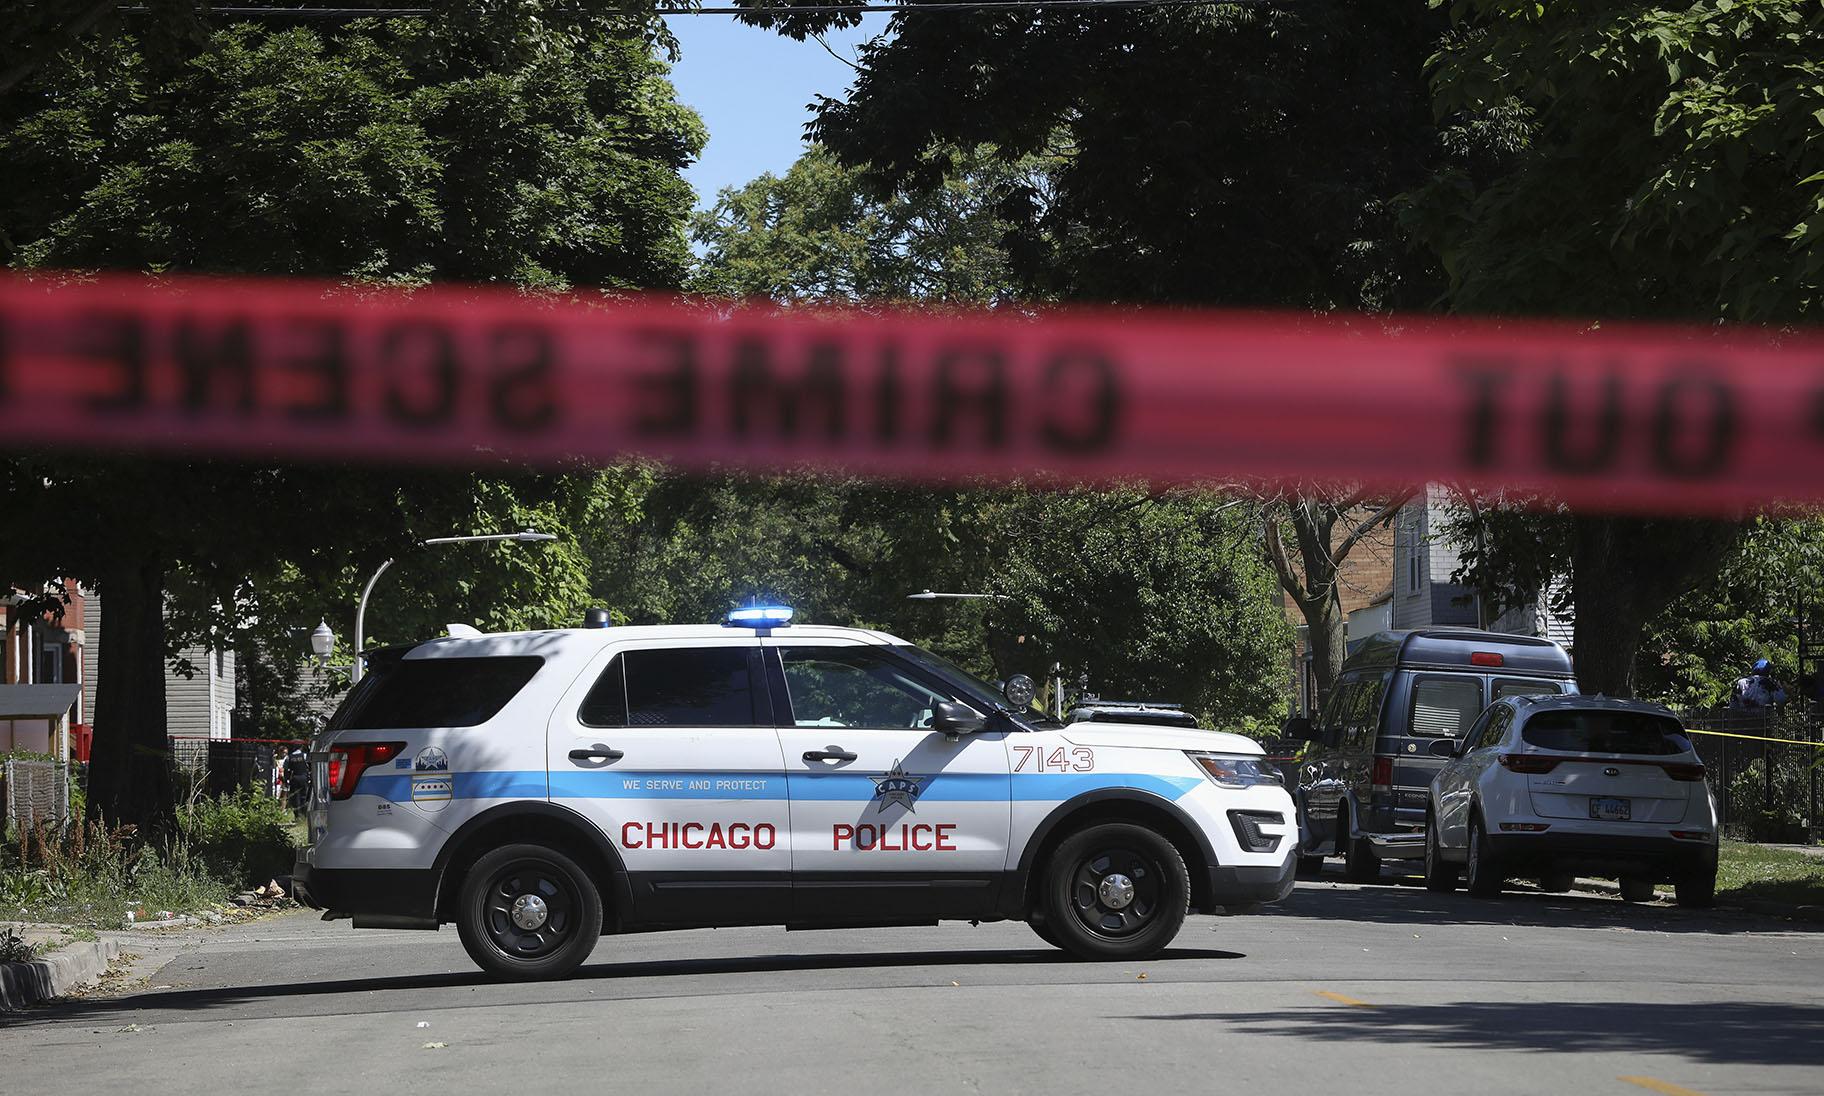 Police tape marks off a Chicago street as officers investigate the scene of a fatal shooting in the city's South Side on Tuesday, June 15, 2021. An argument in a house erupted into gunfire early Tuesday, police said. (AP Photo / Teresa Crawford)